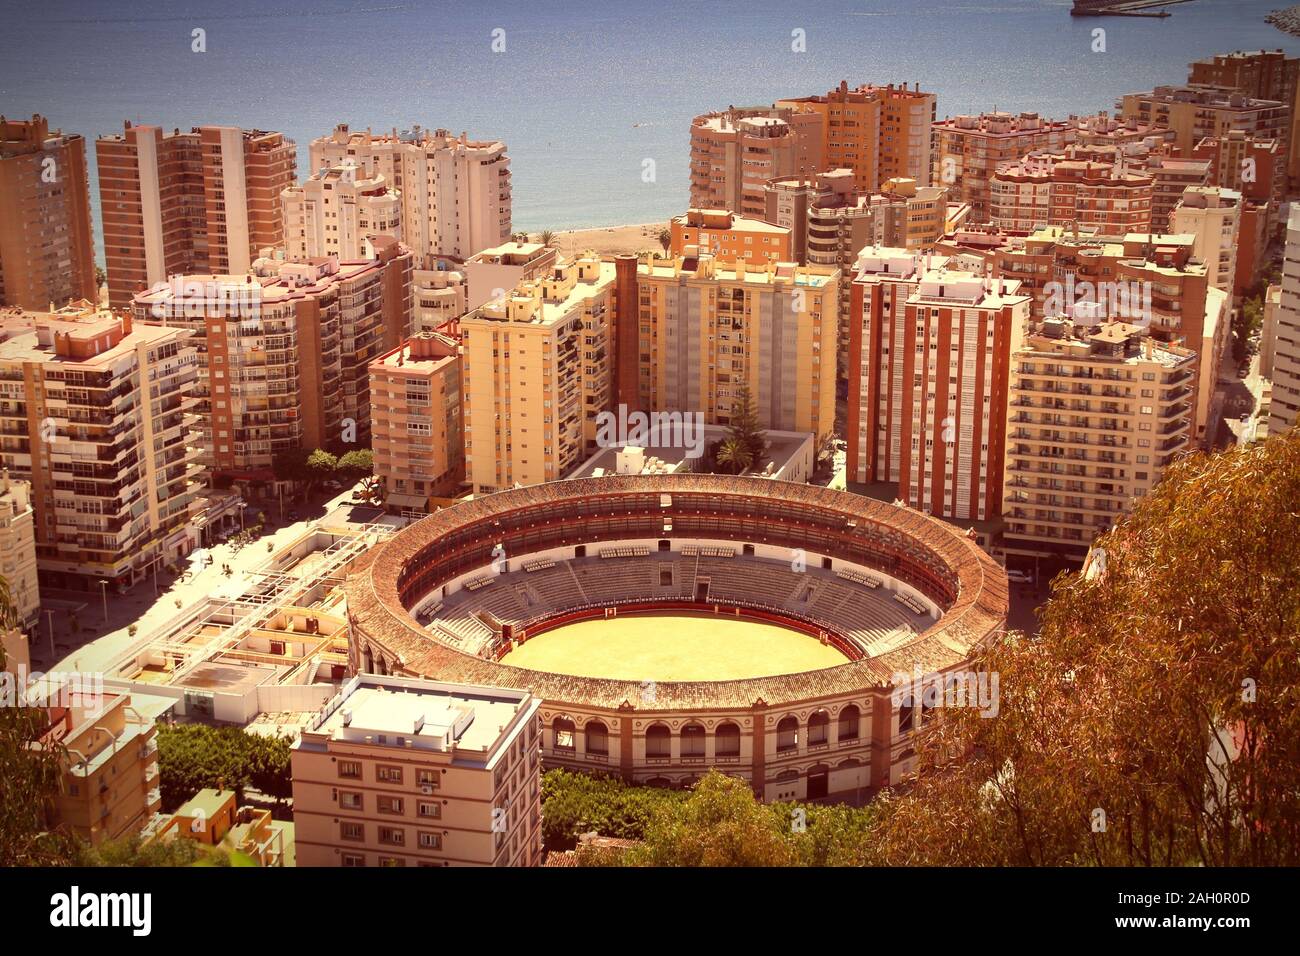 Malaga in Andalusia region of Spain. Famous bull ring stadium. Cross processed color tone - retro image filtered style. Stock Photo